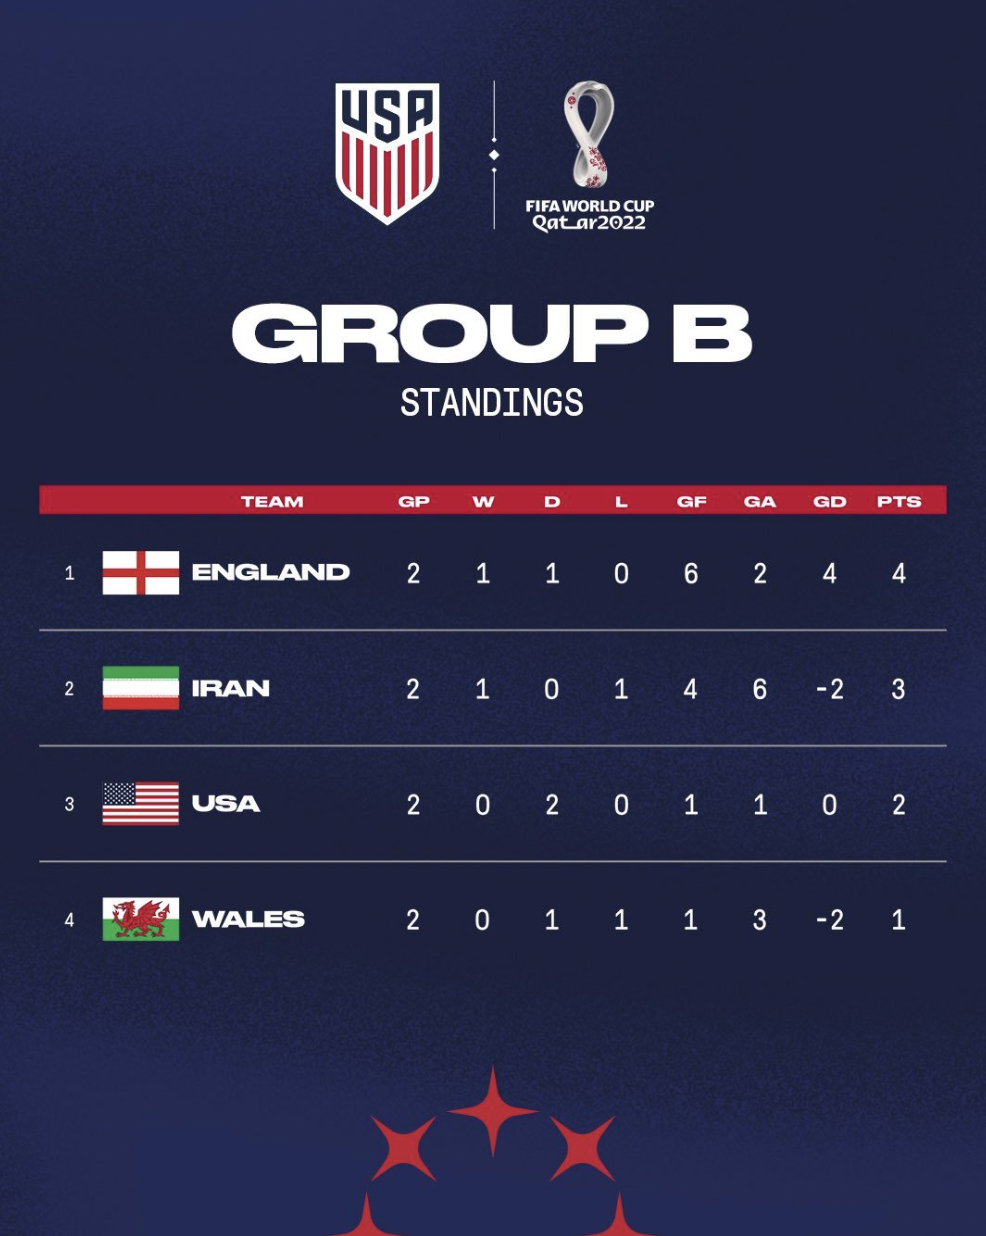 A screenshot of the image circulated by US Soccer. 